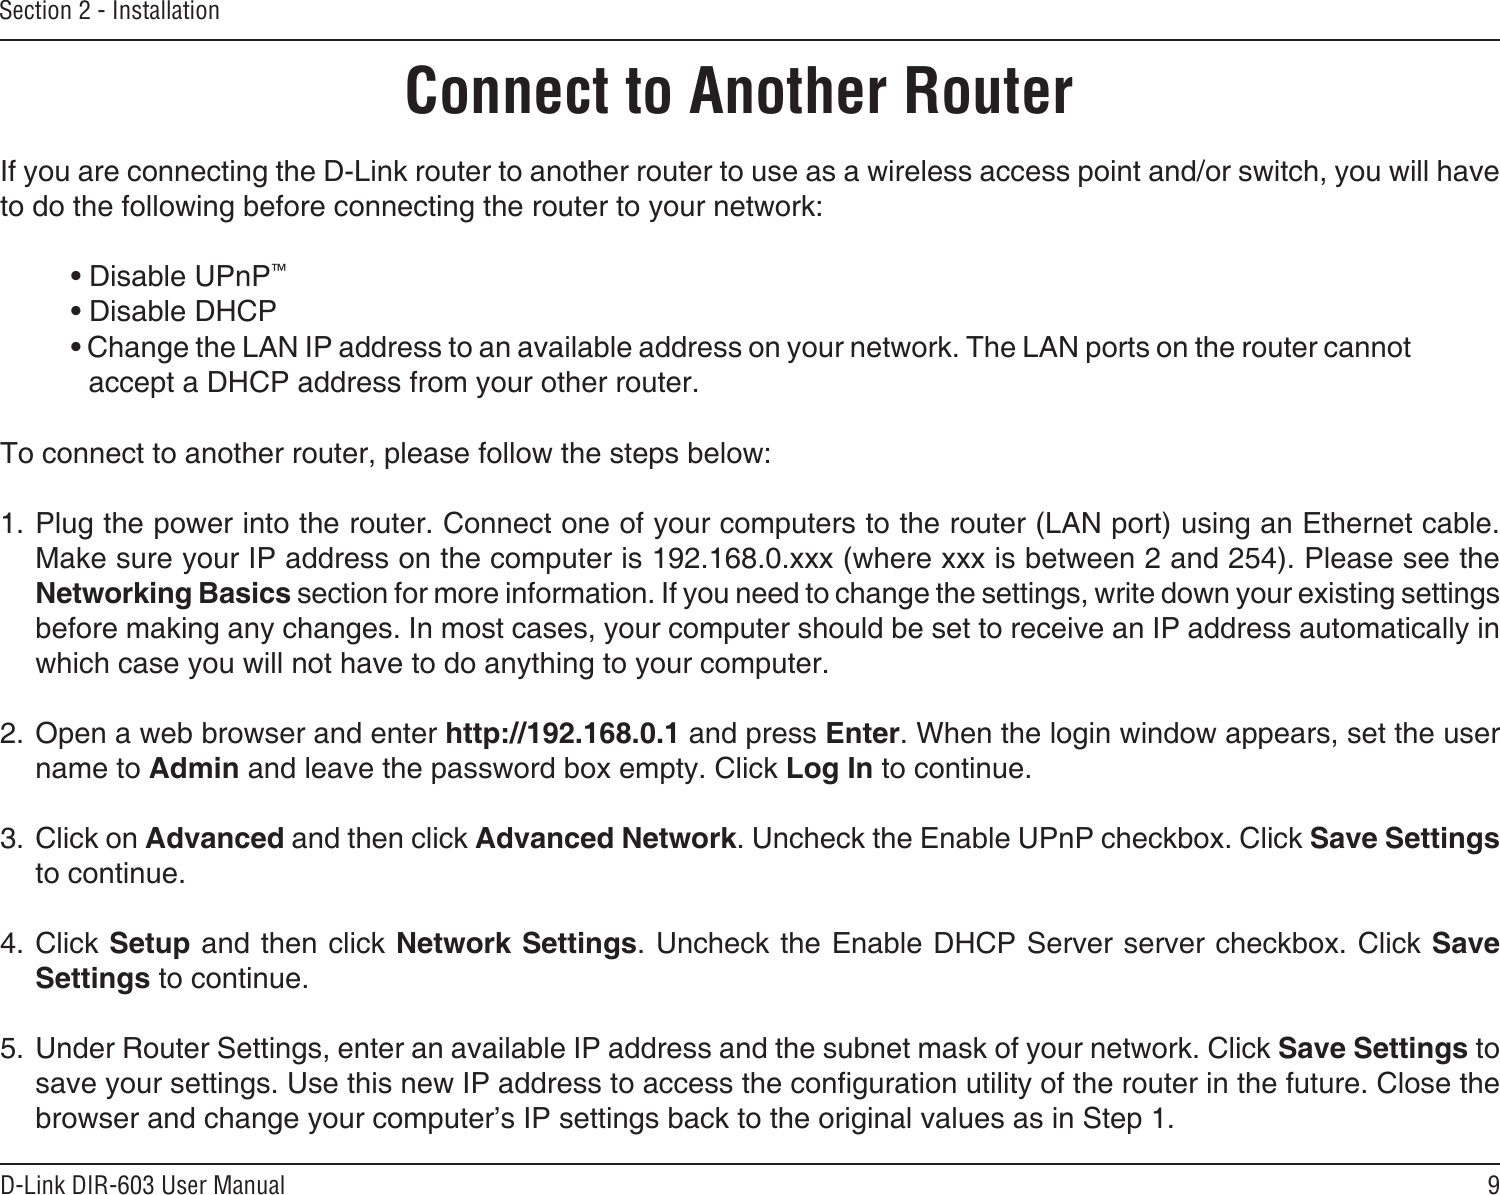 9D-Link DIR-603 User ManualSection 2 - InstallationIf you are connecting the D-Link router to another router to use as a wireless access point and/or switch, you will have to do the following before connecting the router to your network:• Disable UPnP™• Disable DHCP• Change the LAN IP address to an available address on your network. The LAN ports on the router cannot accept a DHCP address from your other router.To connect to another router, please follow the steps below:1. Plug the power into the router. Connect one of your computers to the router (LAN port) using an Ethernet cable. Make sure your IP address on the computer is 192.168.0.xxx (where xxx is between 2 and 254). Please see the Networking Basics section for more information. If you need to change the settings, write down your existing settings before making any changes. In most cases, your computer should be set to receive an IP address automatically in which case you will not have to do anything to your computer.2. Open a web browser and enter http://192.168.0.1 and press Enter. When the login window appears, set the user name to Admin and leave the password box empty. Click Log In to continue.3. Click on Advanced and then click Advanced Network. Uncheck the Enable UPnP checkbox. Click Save Settings to continue. 4. Click Setup and then click Network Settings. Uncheck the Enable DHCP Server server checkbox. Click Save Settings to continue.5. Under Router Settings, enter an available IP address and the subnet mask of your network. Click Save Settings to save your settings. Use this new IP address to access the conguration utility of the router in the future. Close the browser and change your computer’s IP settings back to the original values as in Step 1.Connect to Another Router